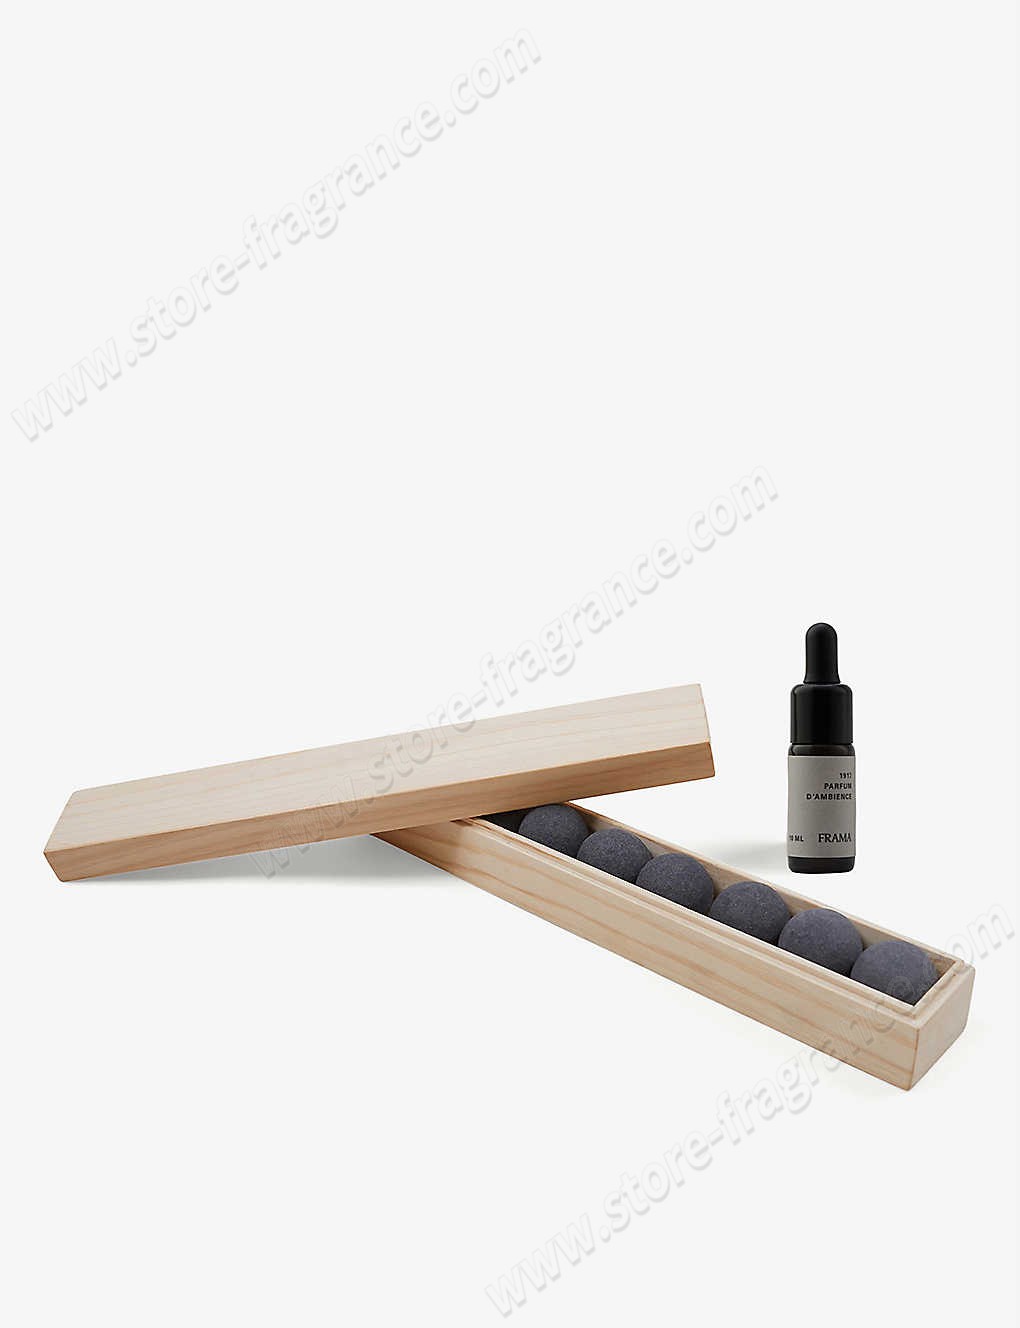 FRAMA/1917 From Soil To Form Charcoal natural room diffuser Limit Offer - FRAMA/1917 From Soil To Form Charcoal natural room diffuser Limit Offer